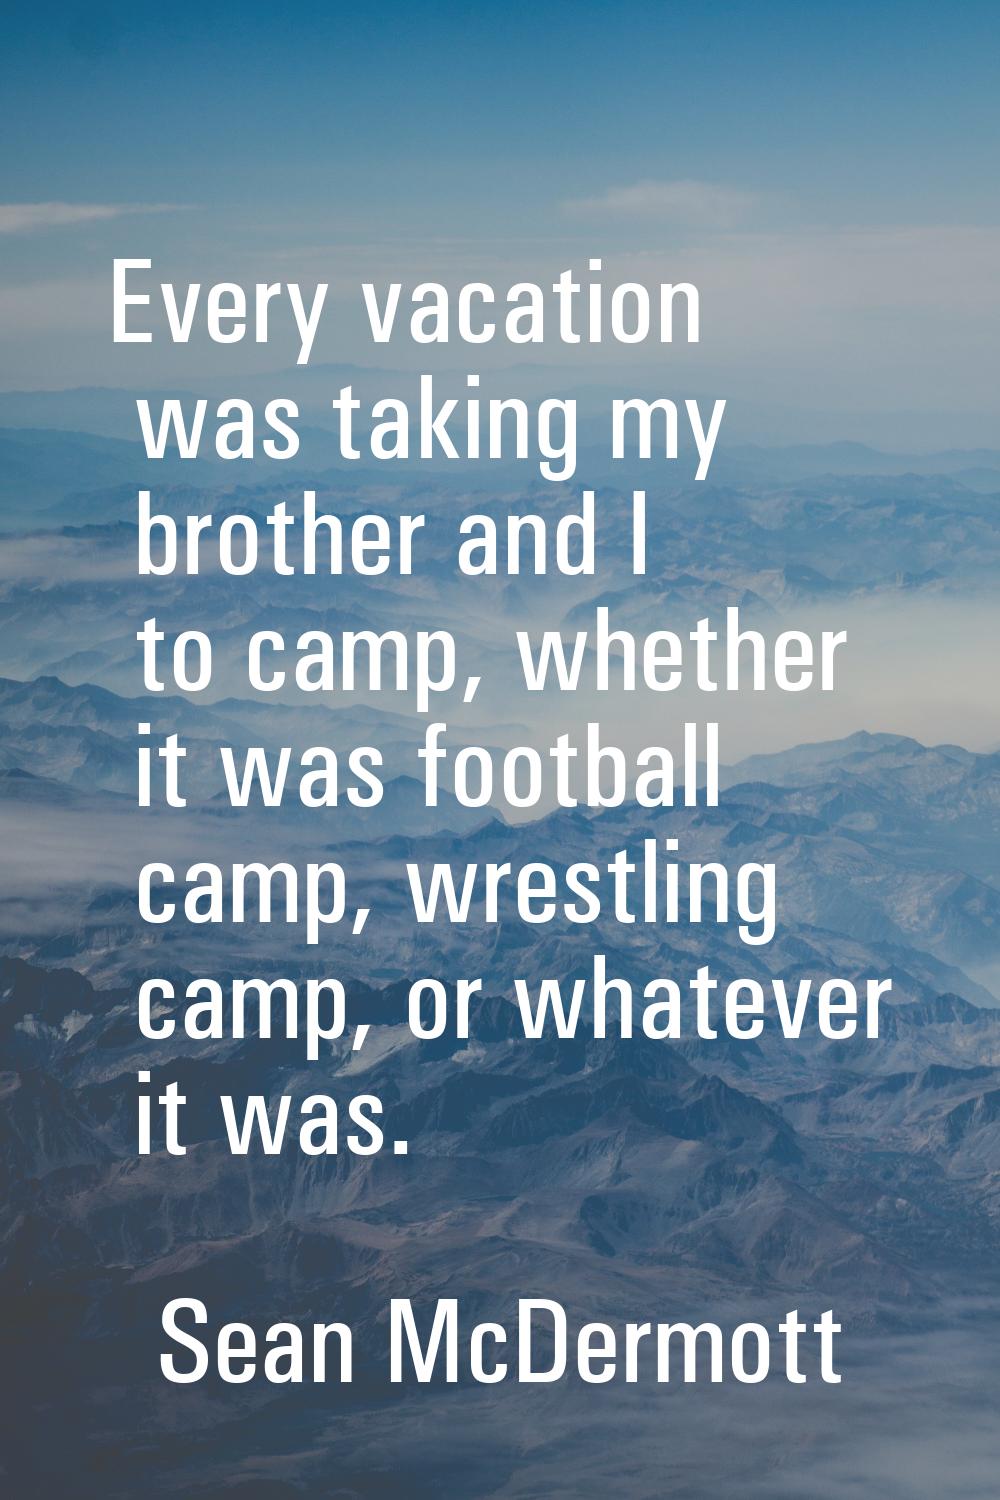 Every vacation was taking my brother and I to camp, whether it was football camp, wrestling camp, o